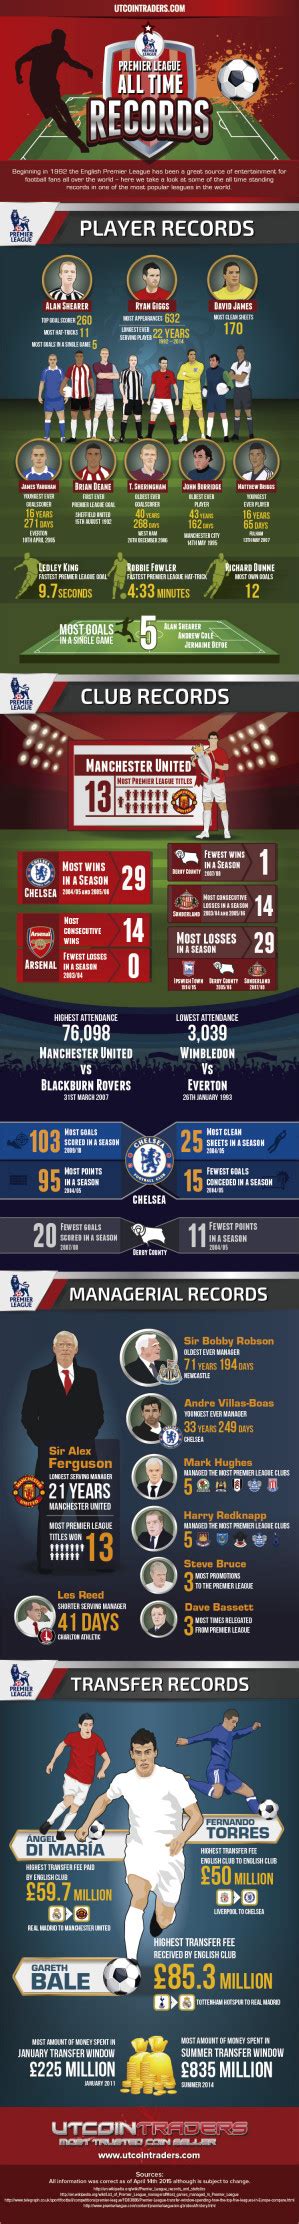 Premier League All Time Records Infographic